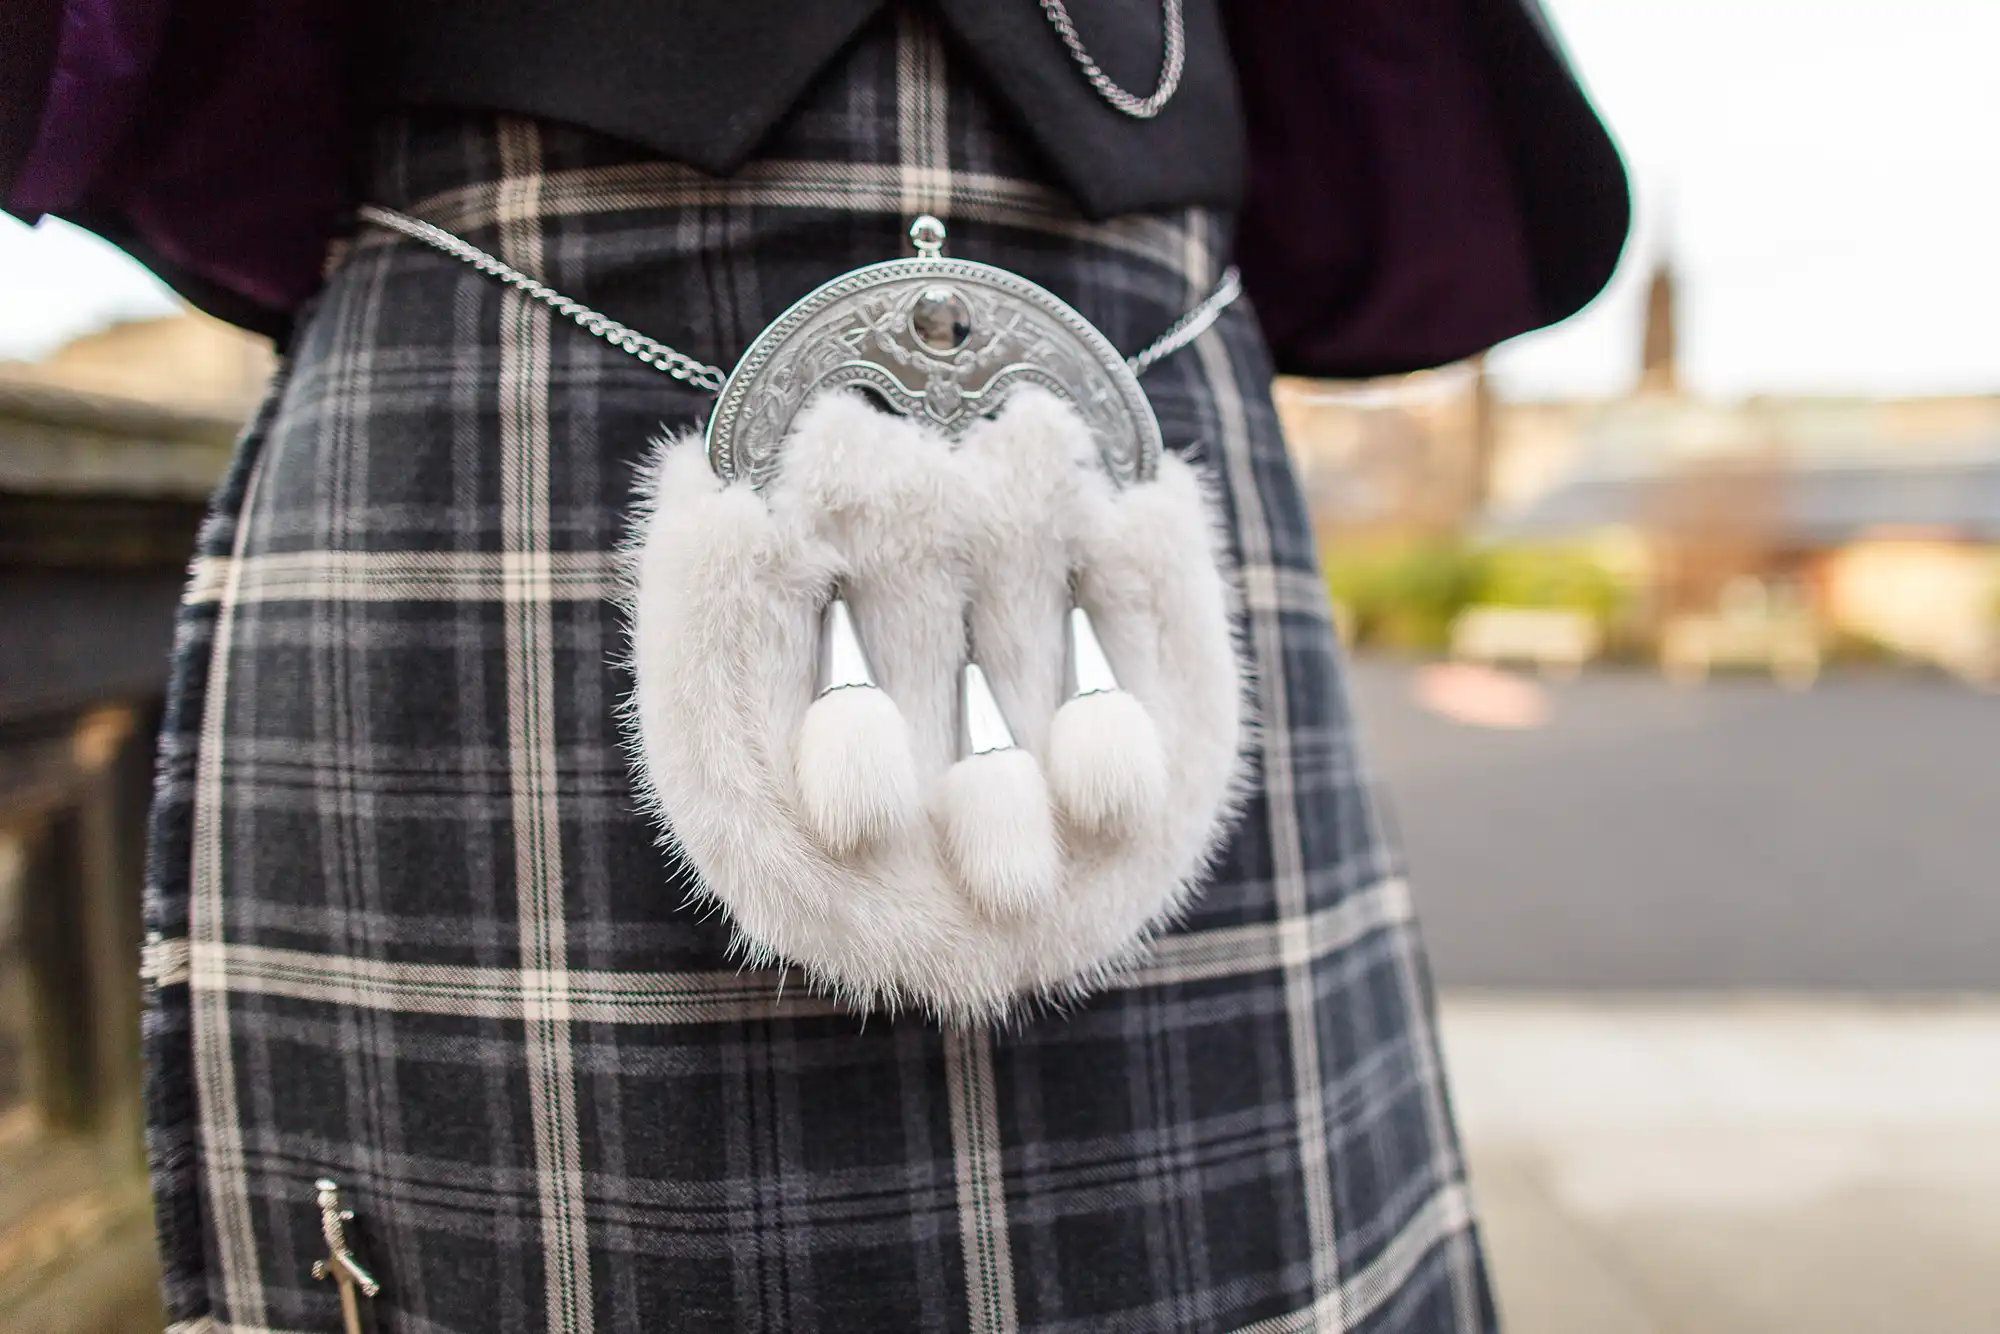 Close-up of a traditional scottish sporran made of white fur and metal, attached to a tartan kilt.